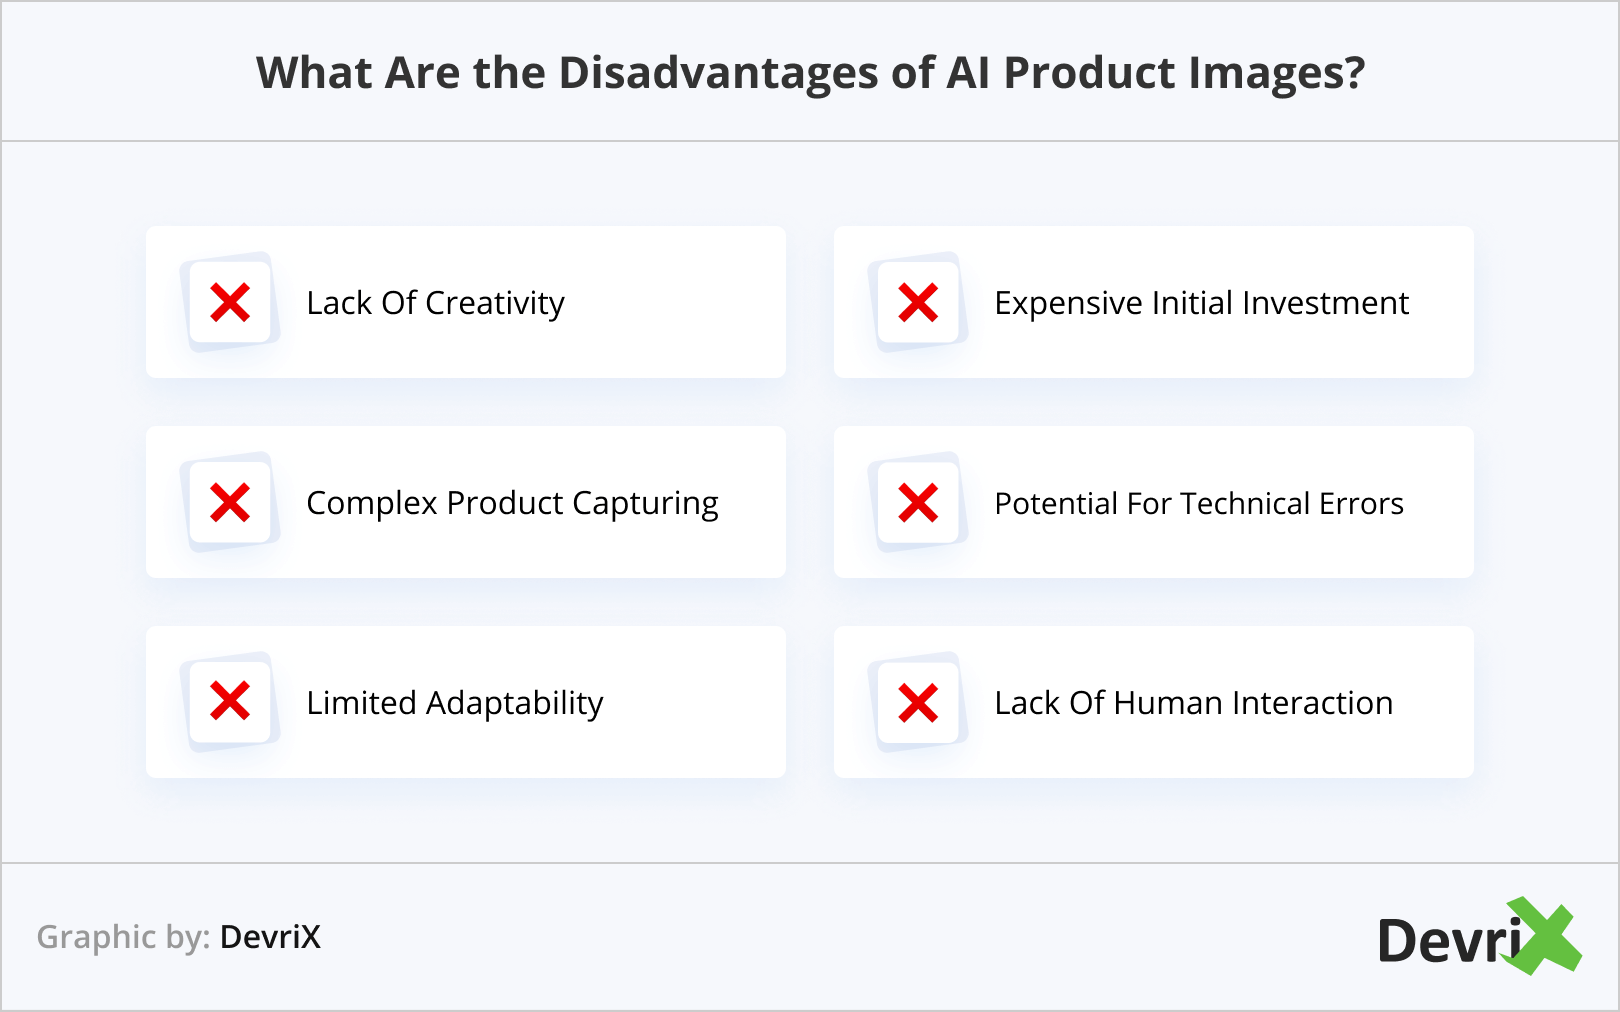 What Are the Disadvantages of AI Product Images